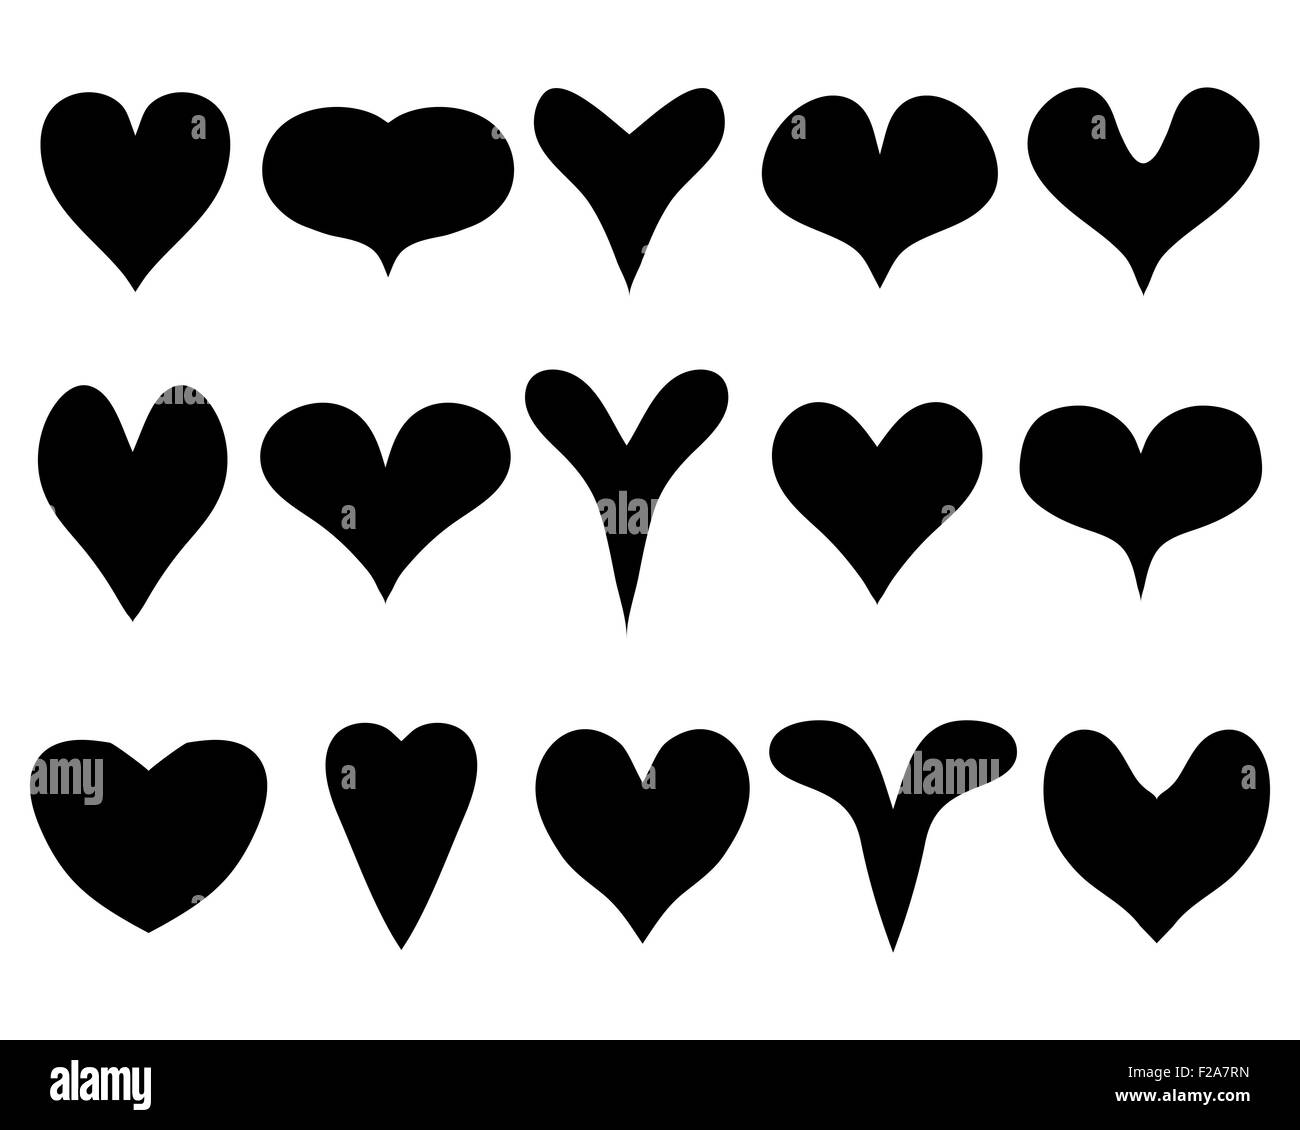 Black silhouettes of heart on the white background Stock Photo